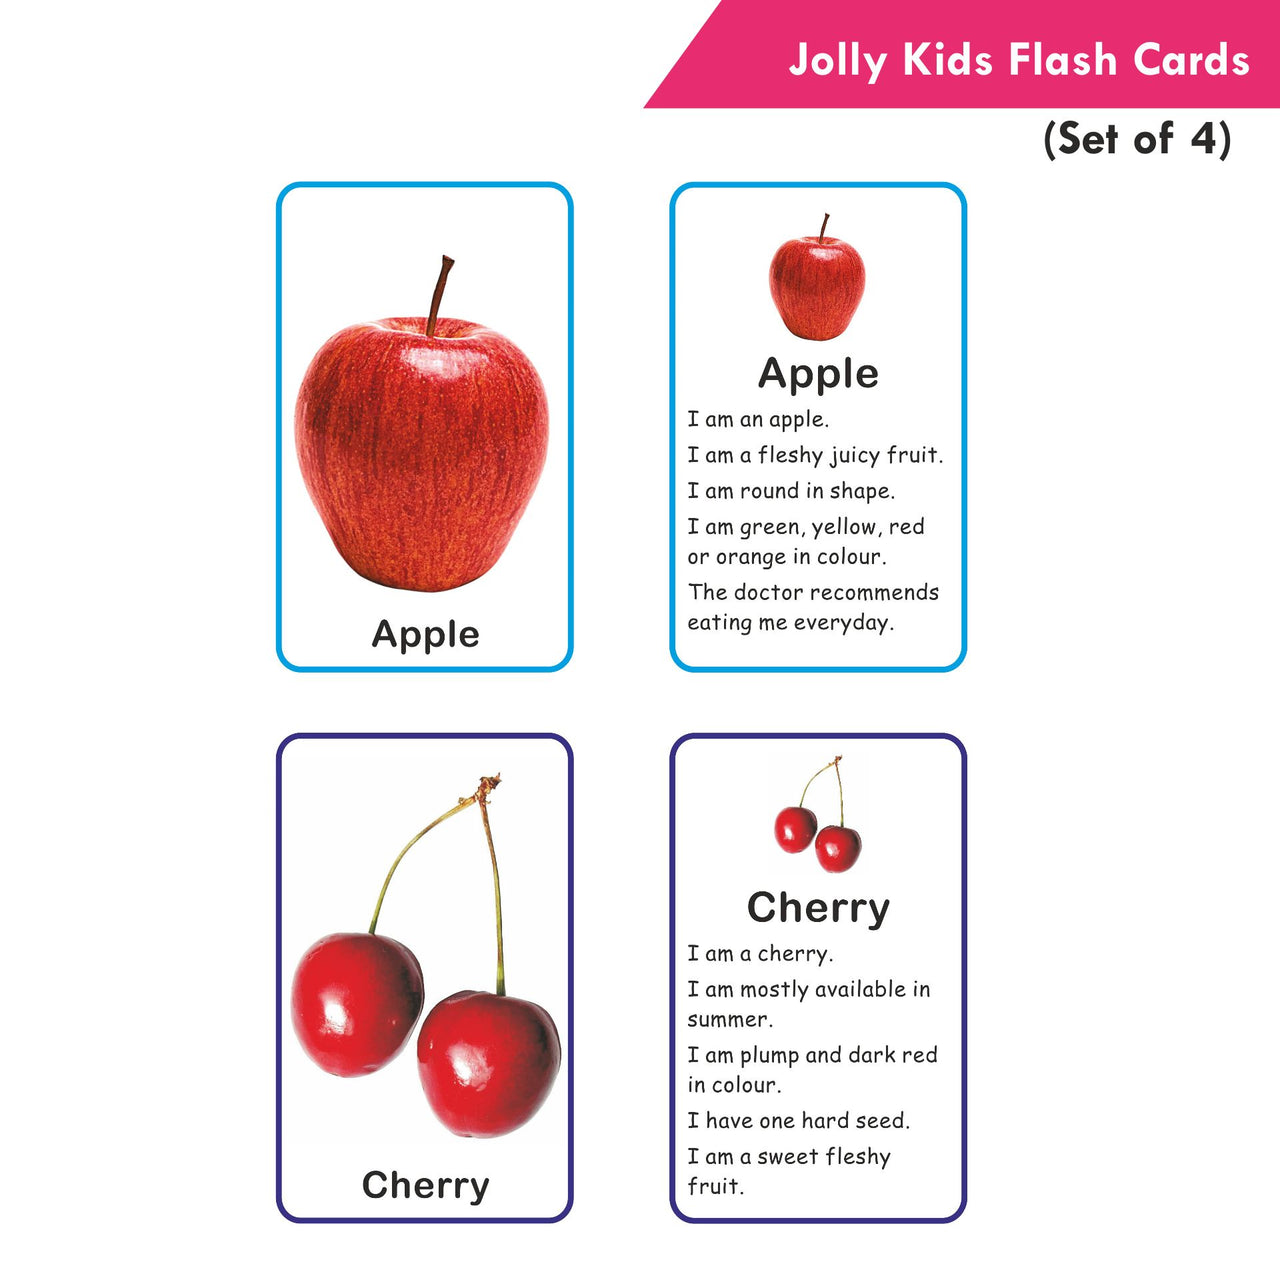 Jolly Kids Pre-school Learning Flash Cards for Kids| Set of 4| 32 Cards on Each Pack| Ages 1-6 Years - Distacart